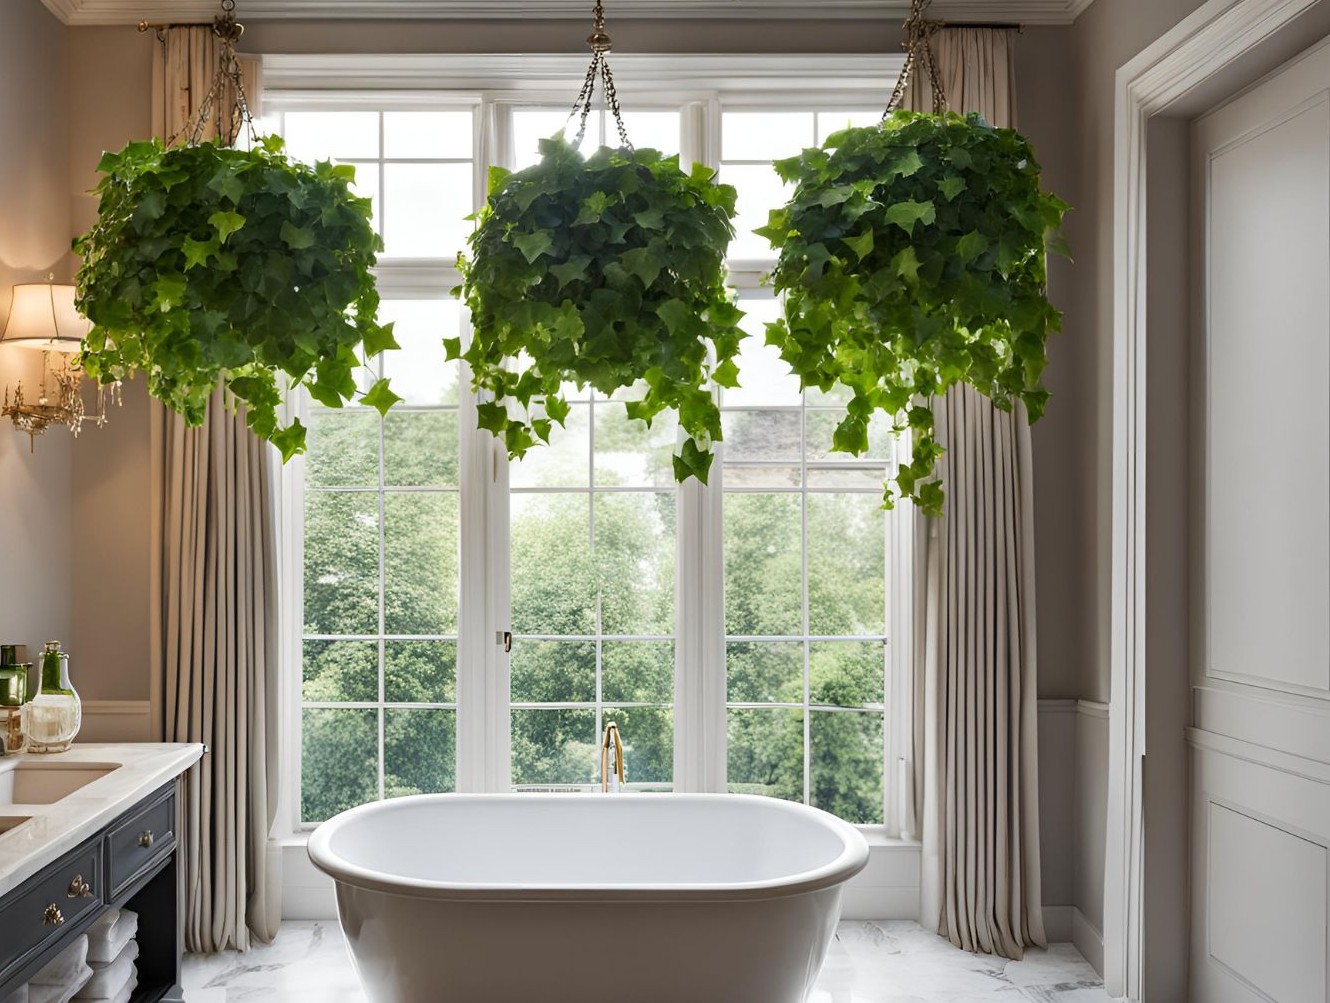 image of english ivy hedera helix hanging in baskets above a freestanding bath in front of a large squared window